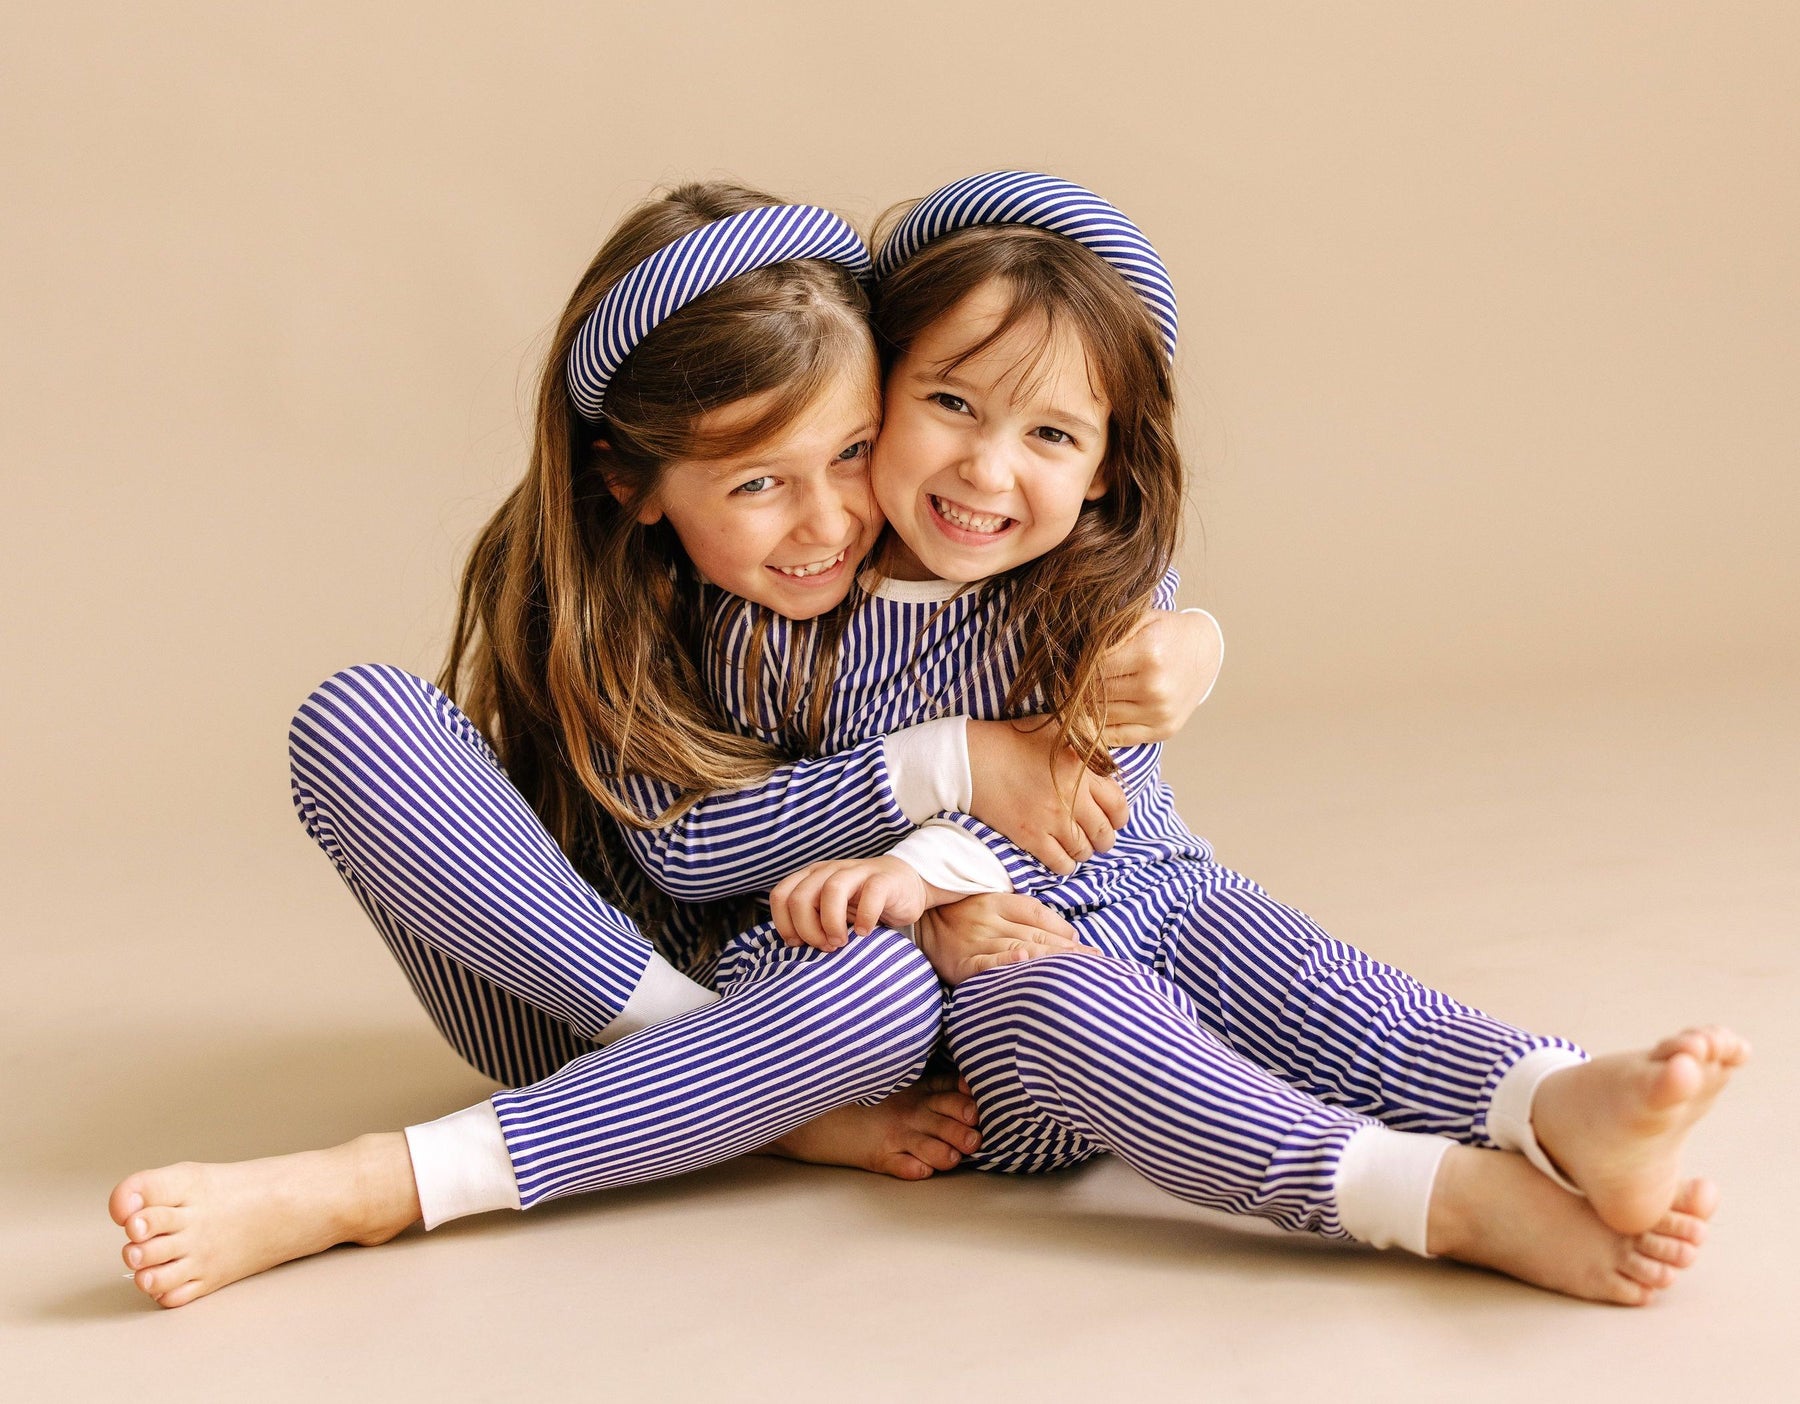 Organic Cotton Pajamas- The Softest PJs for Kids are Here!